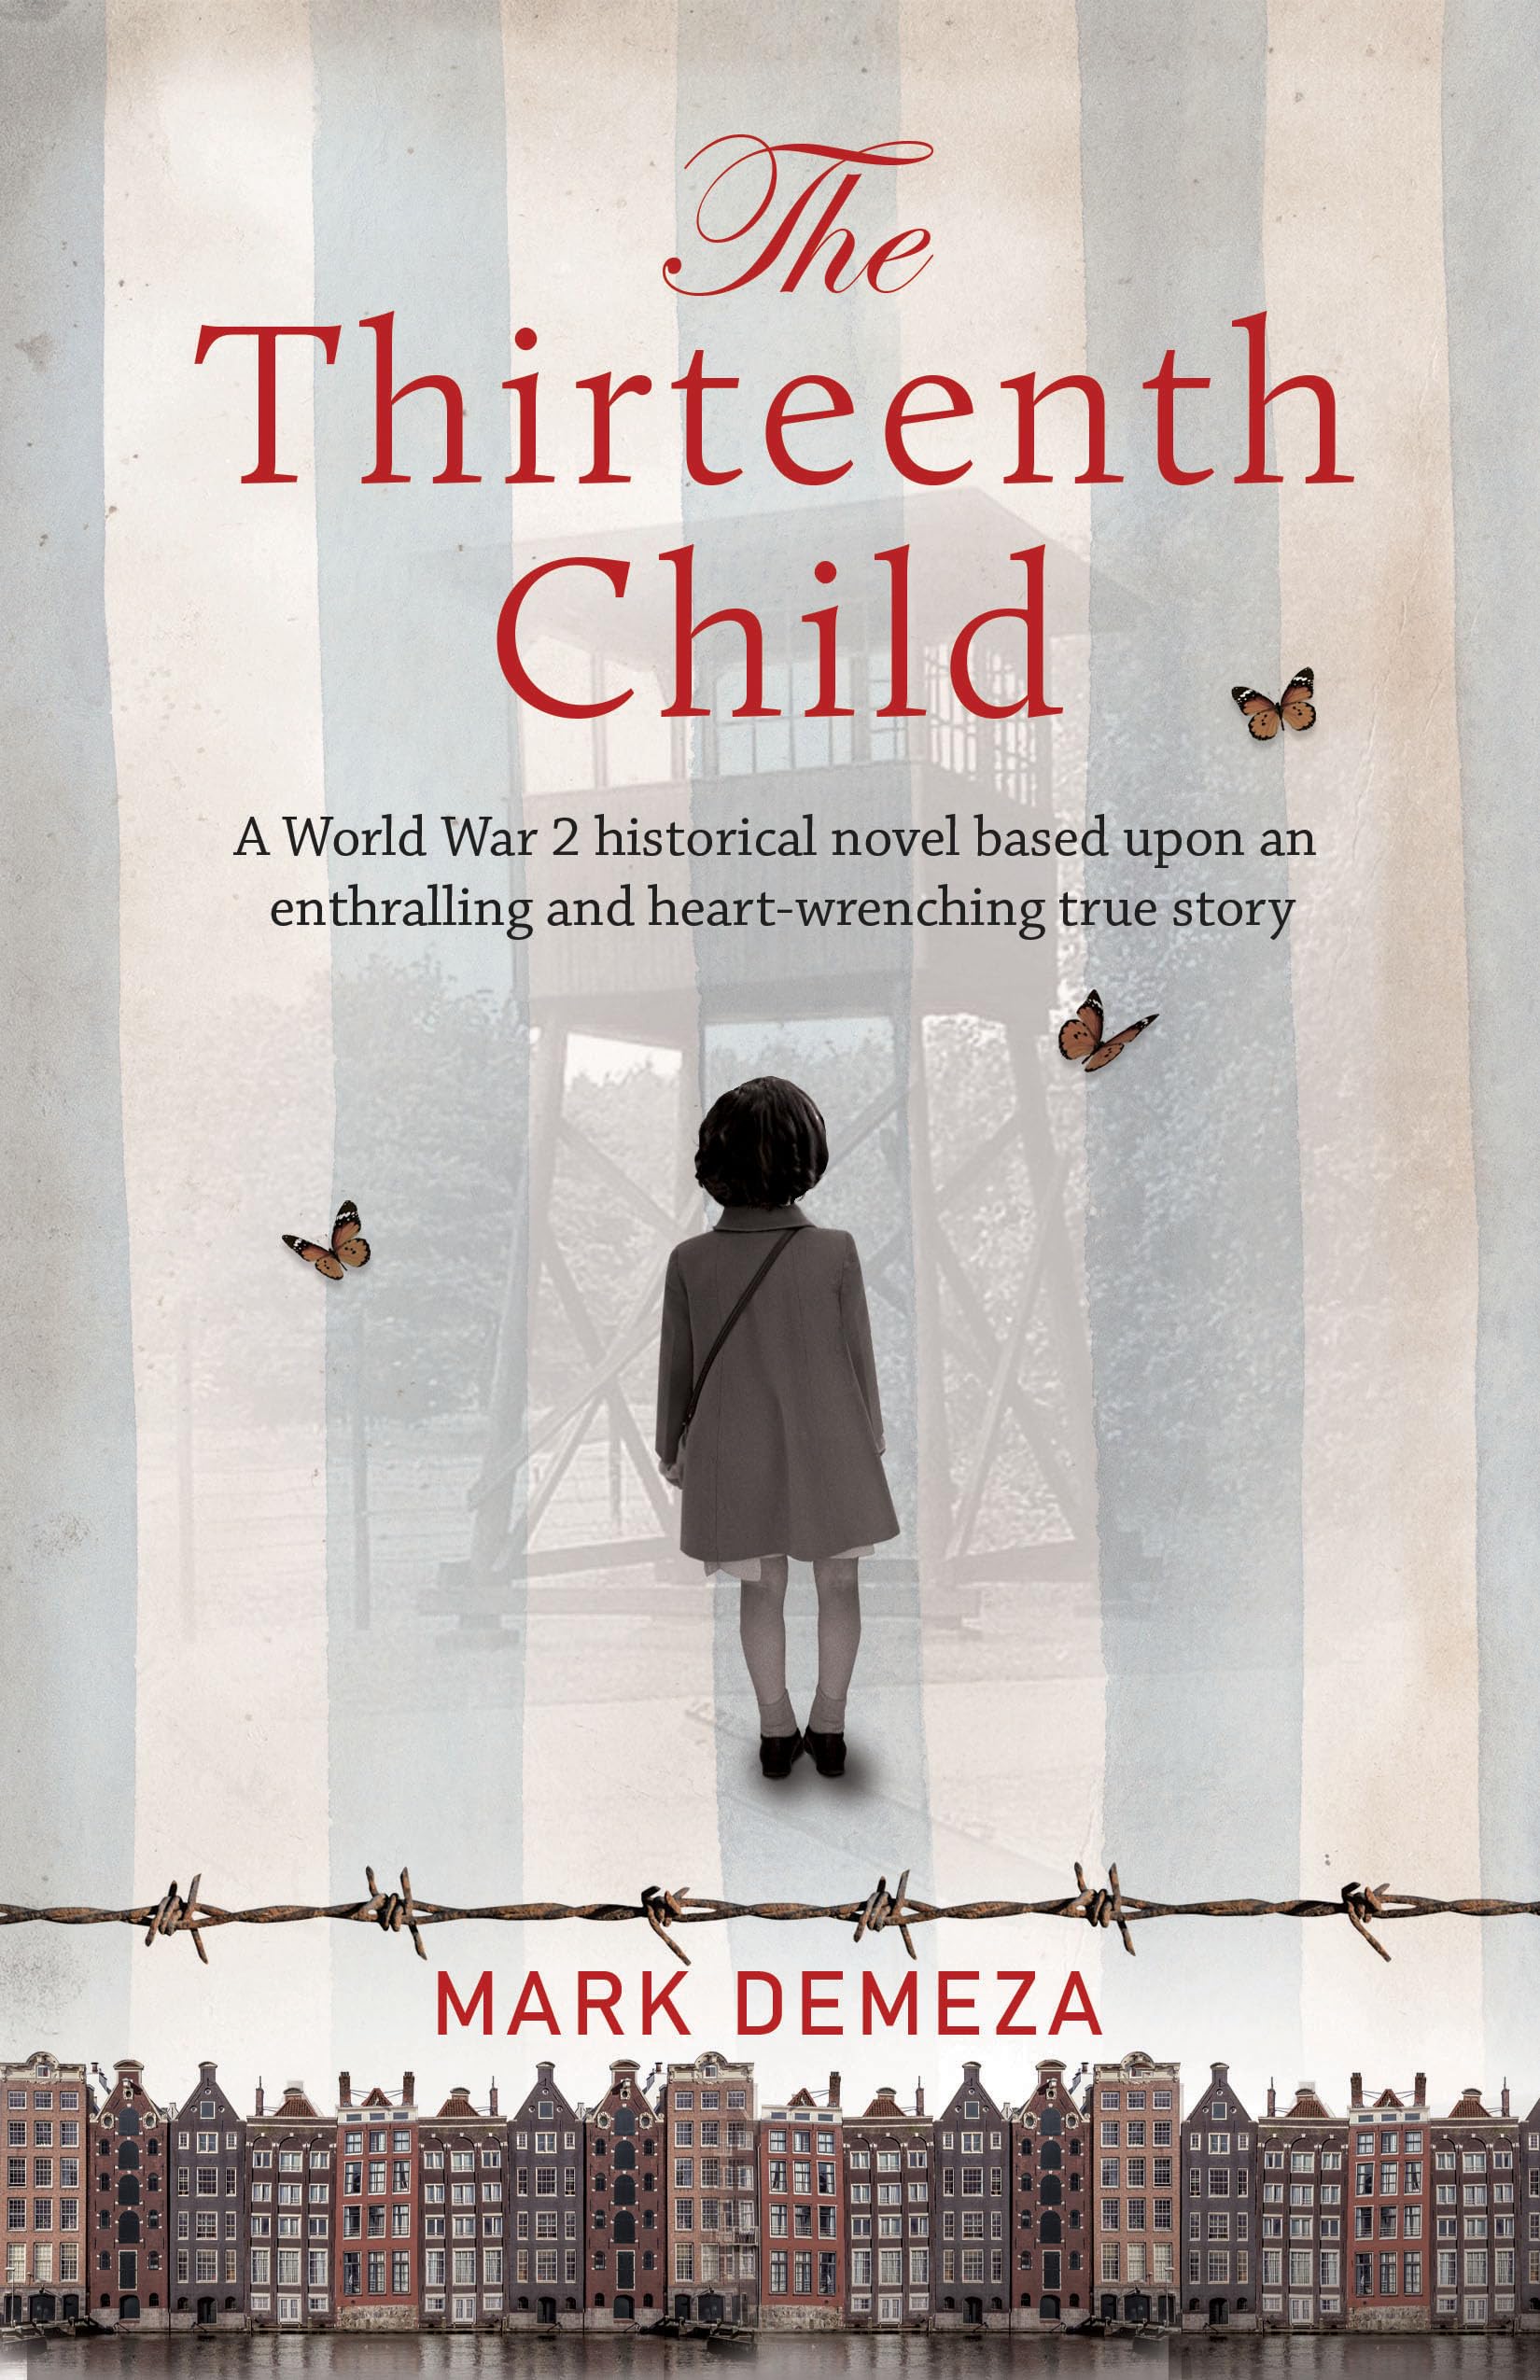 The Thirteenth Child: A World War 2 historical novel based upon an enthralling and heart-wrenching true story